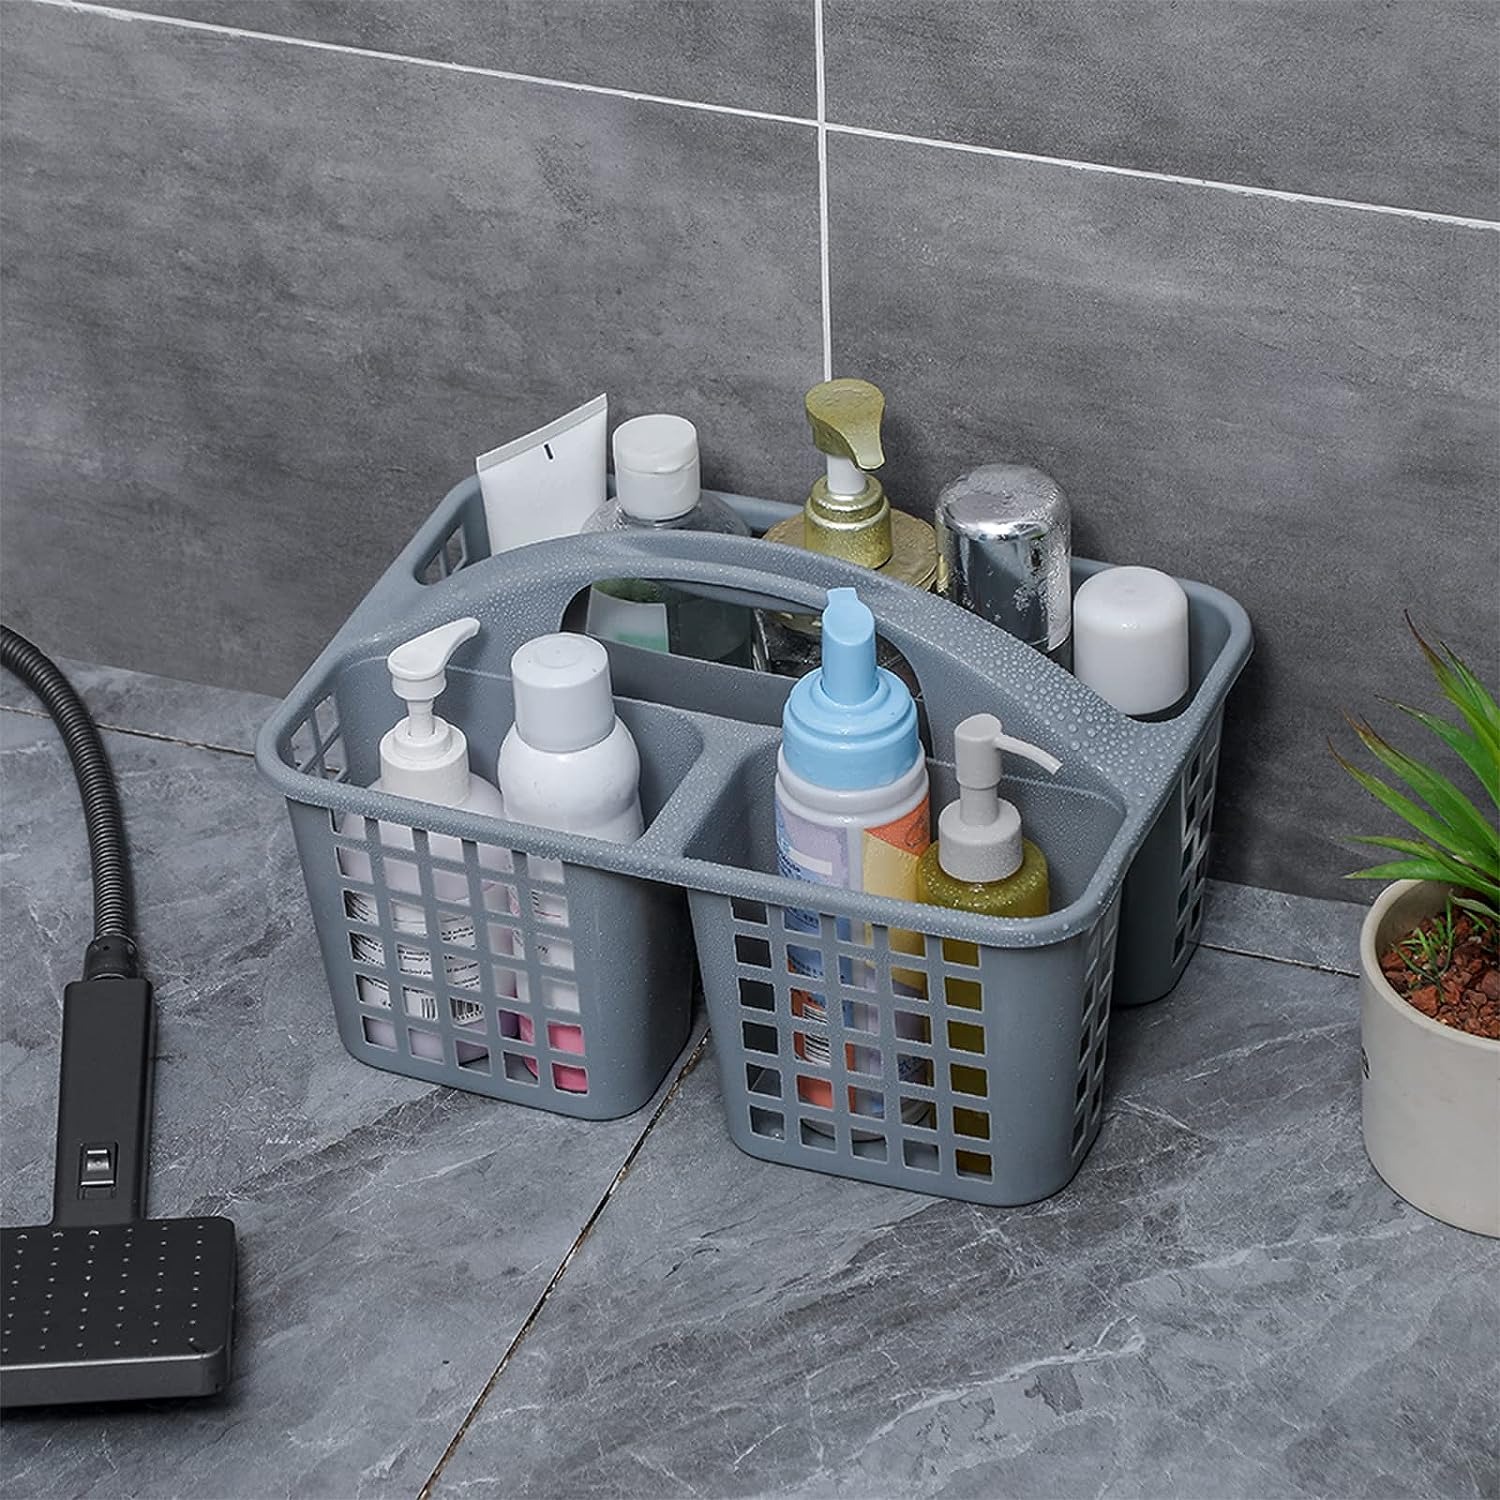 Plastic Shower Caddy Basket with Compartments, Portable Divided